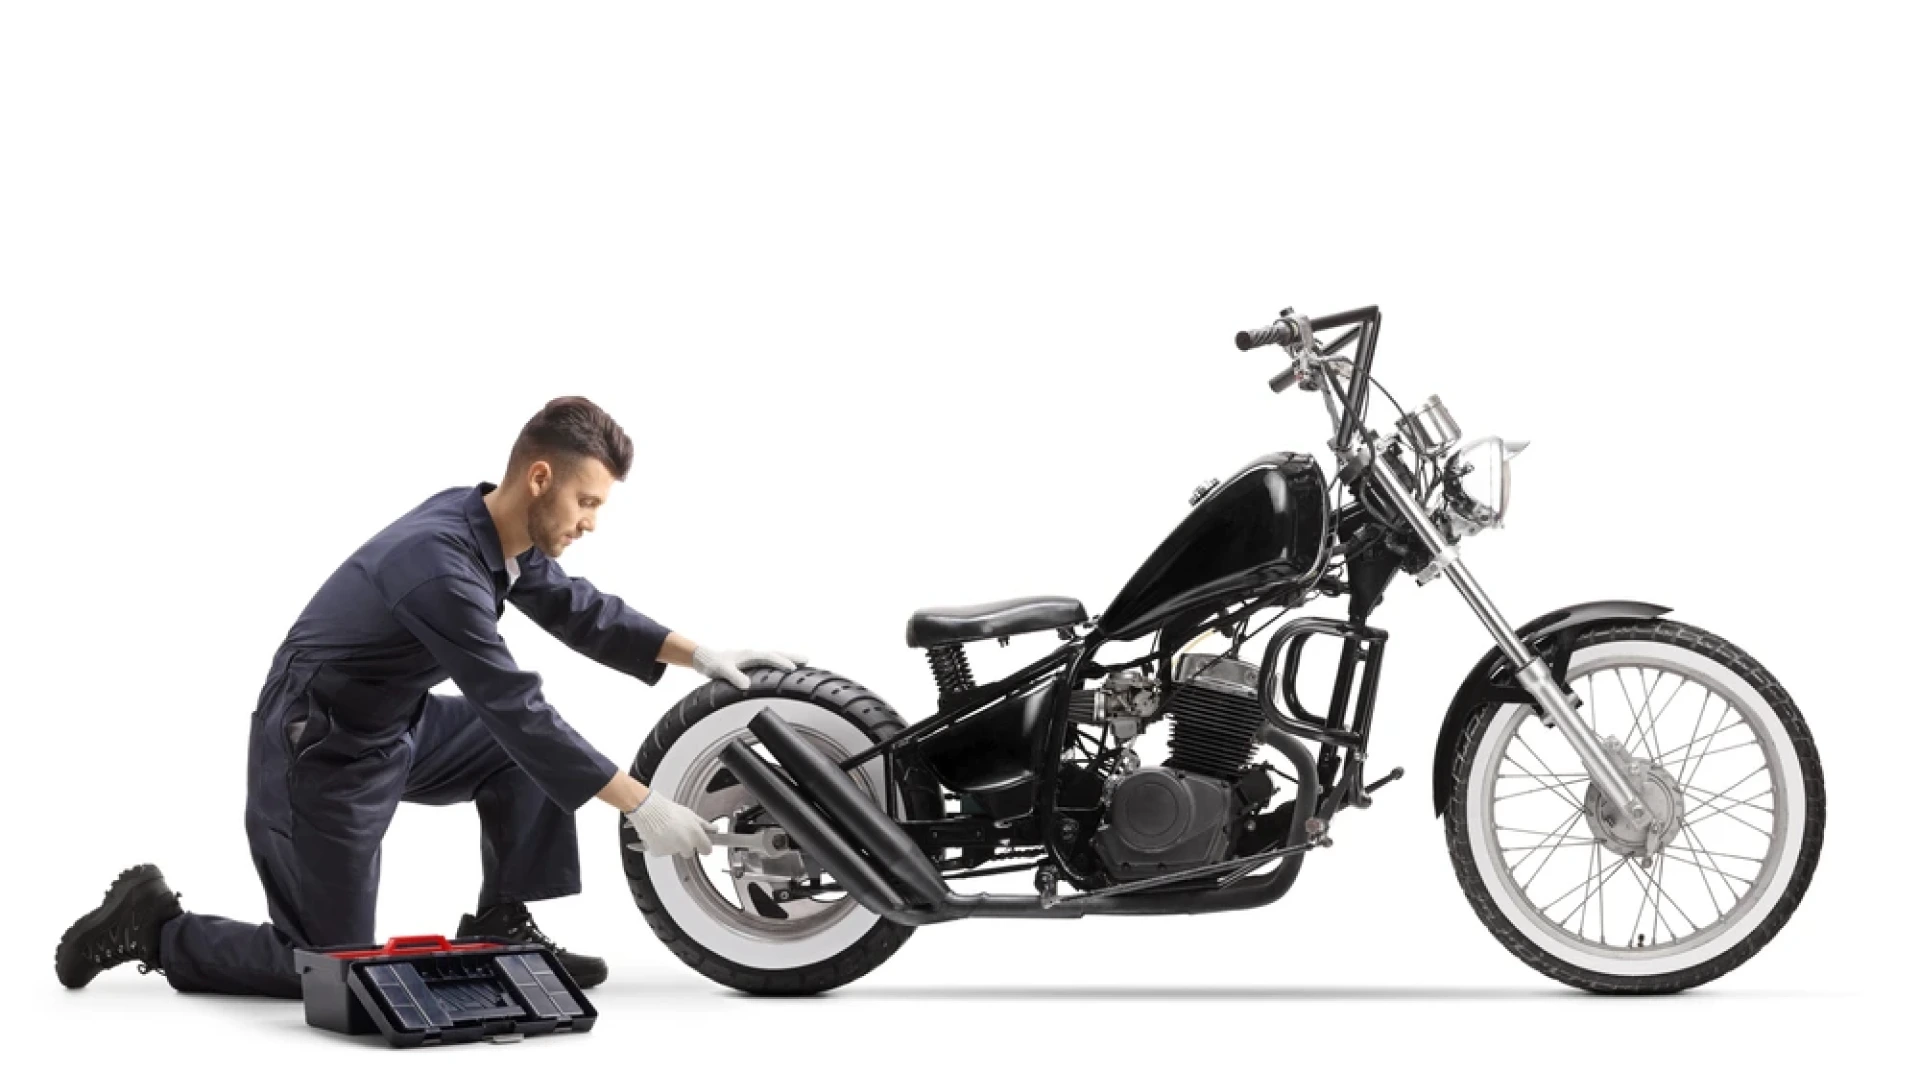 How do Maintenance and Regular Servicing of bikes help you get better Resale Prices?